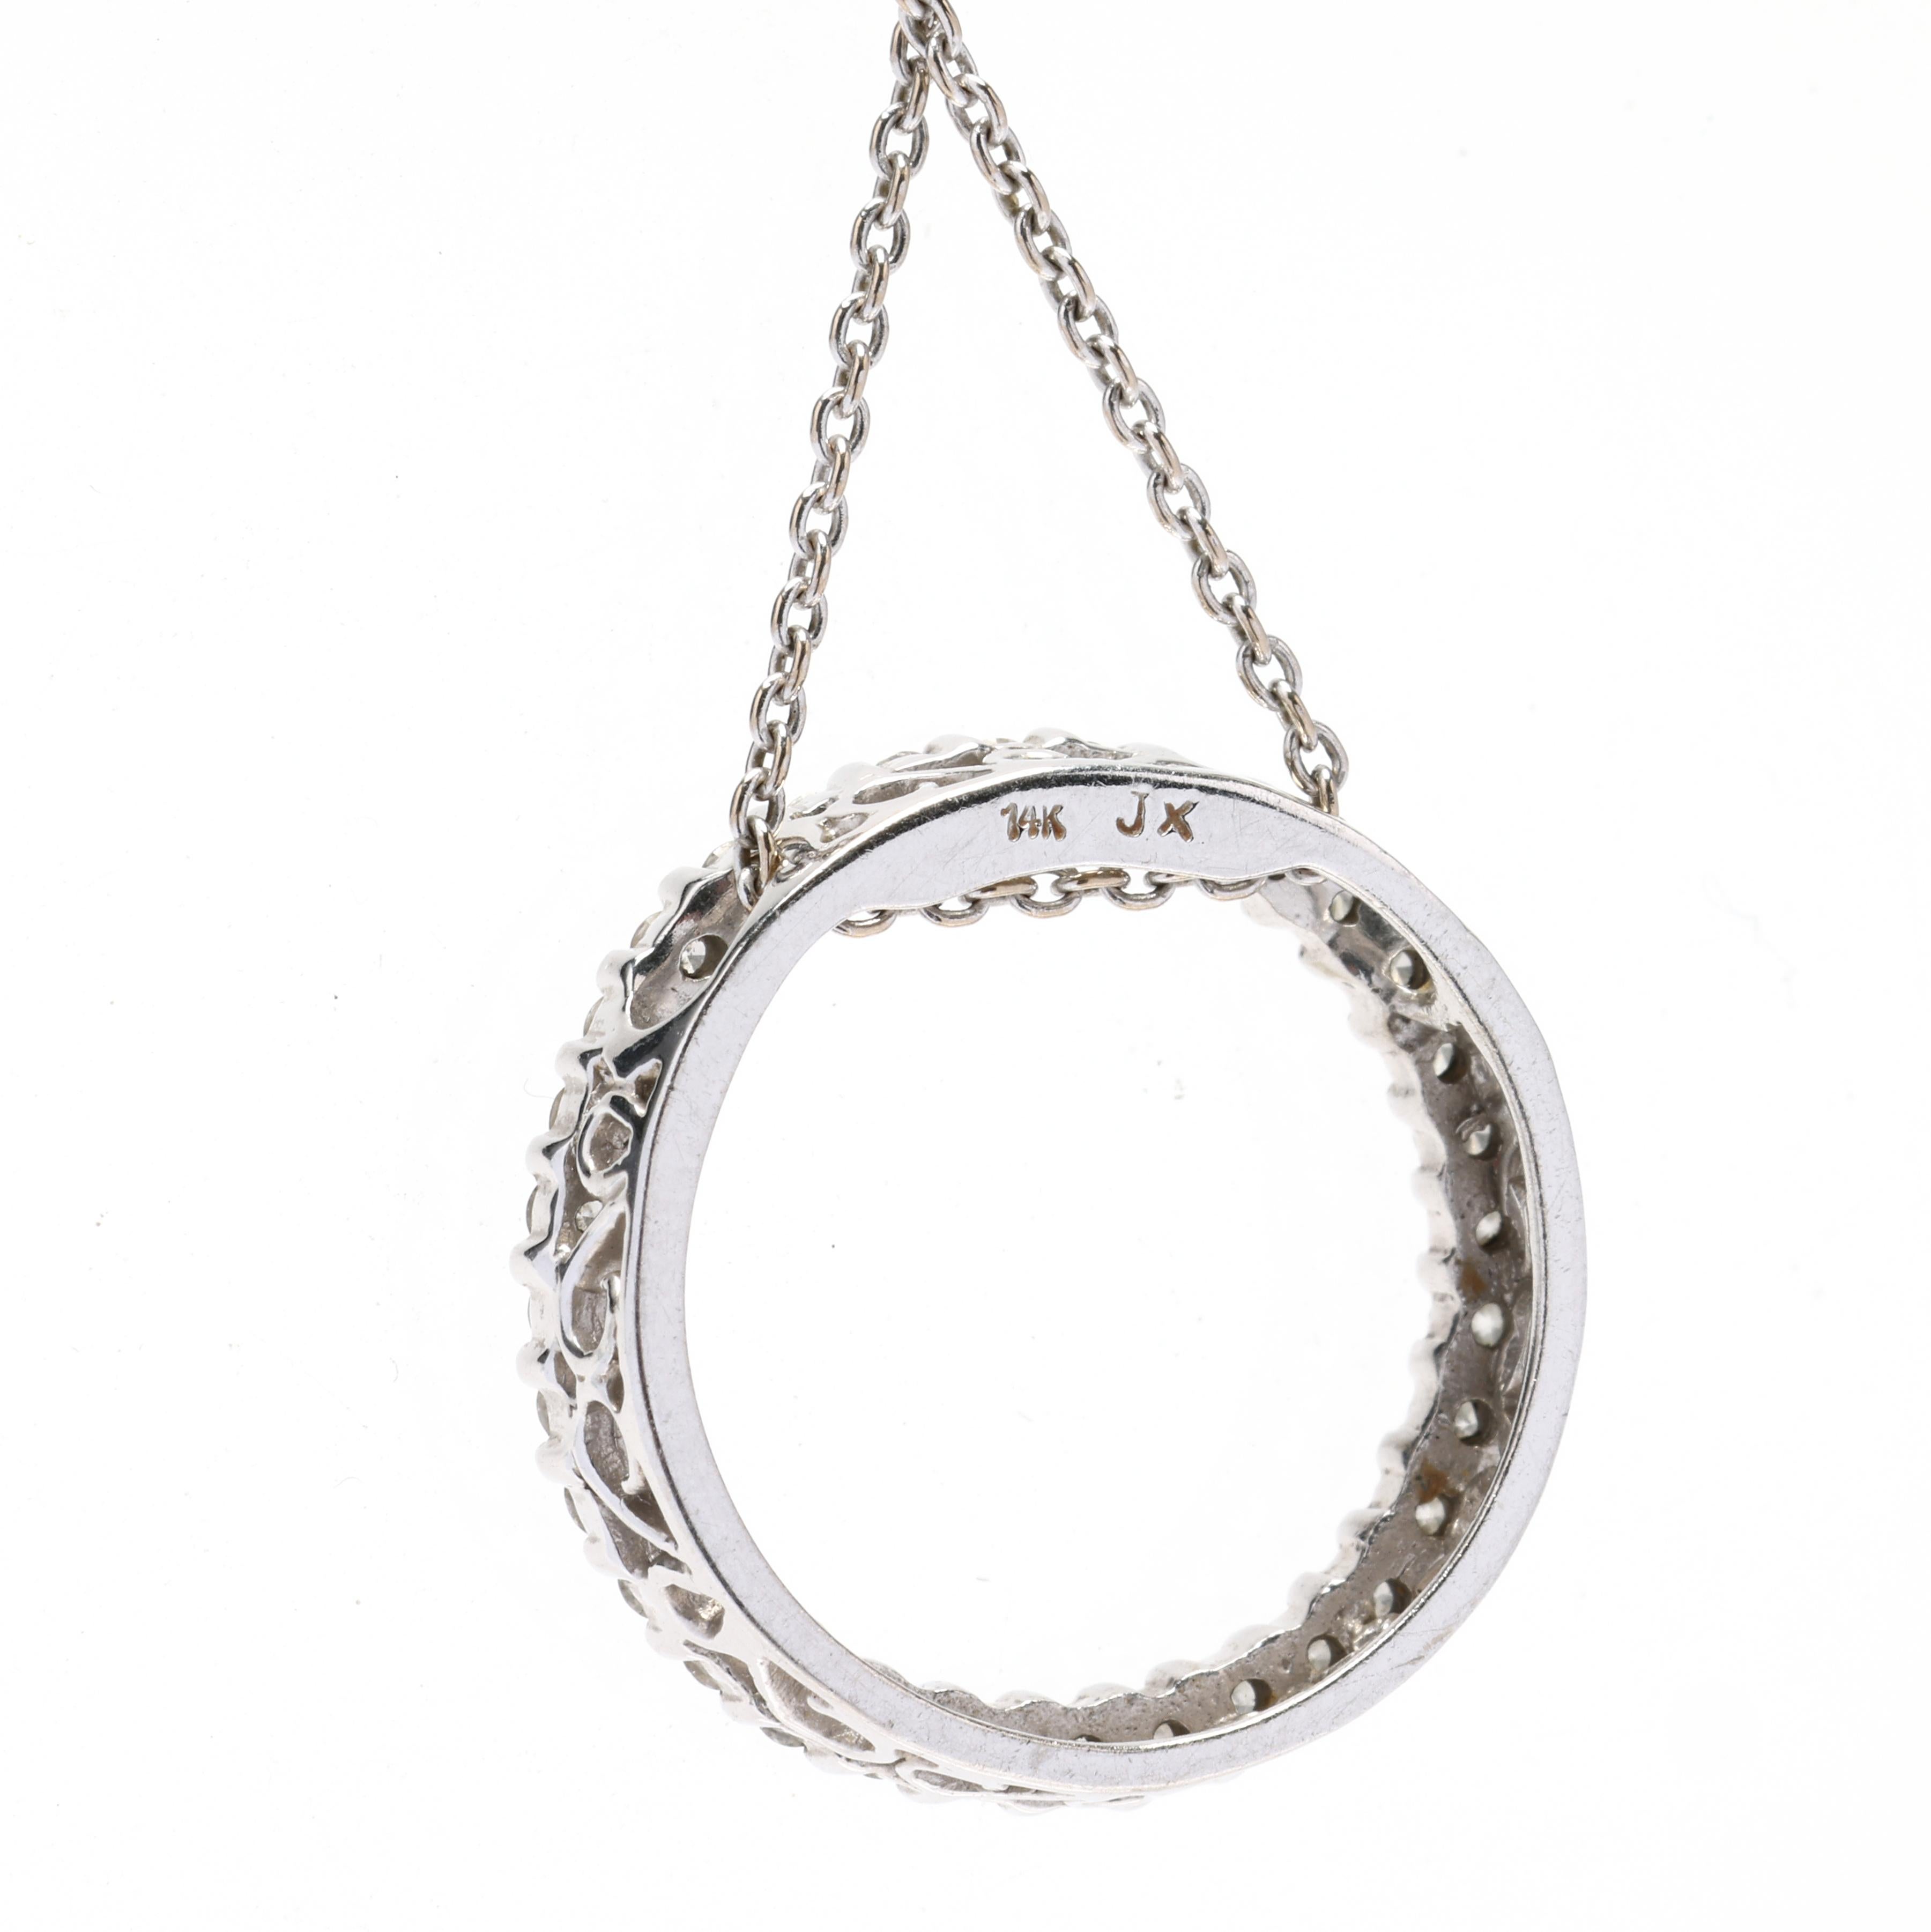 This stunning 1cwt diamond circle pendant necklace is a true statement piece that will add elegance and sparkle to any look. Made from 14k white gold, this necklace features a circle pendant encrusted with 1 carat total weight of brilliant white